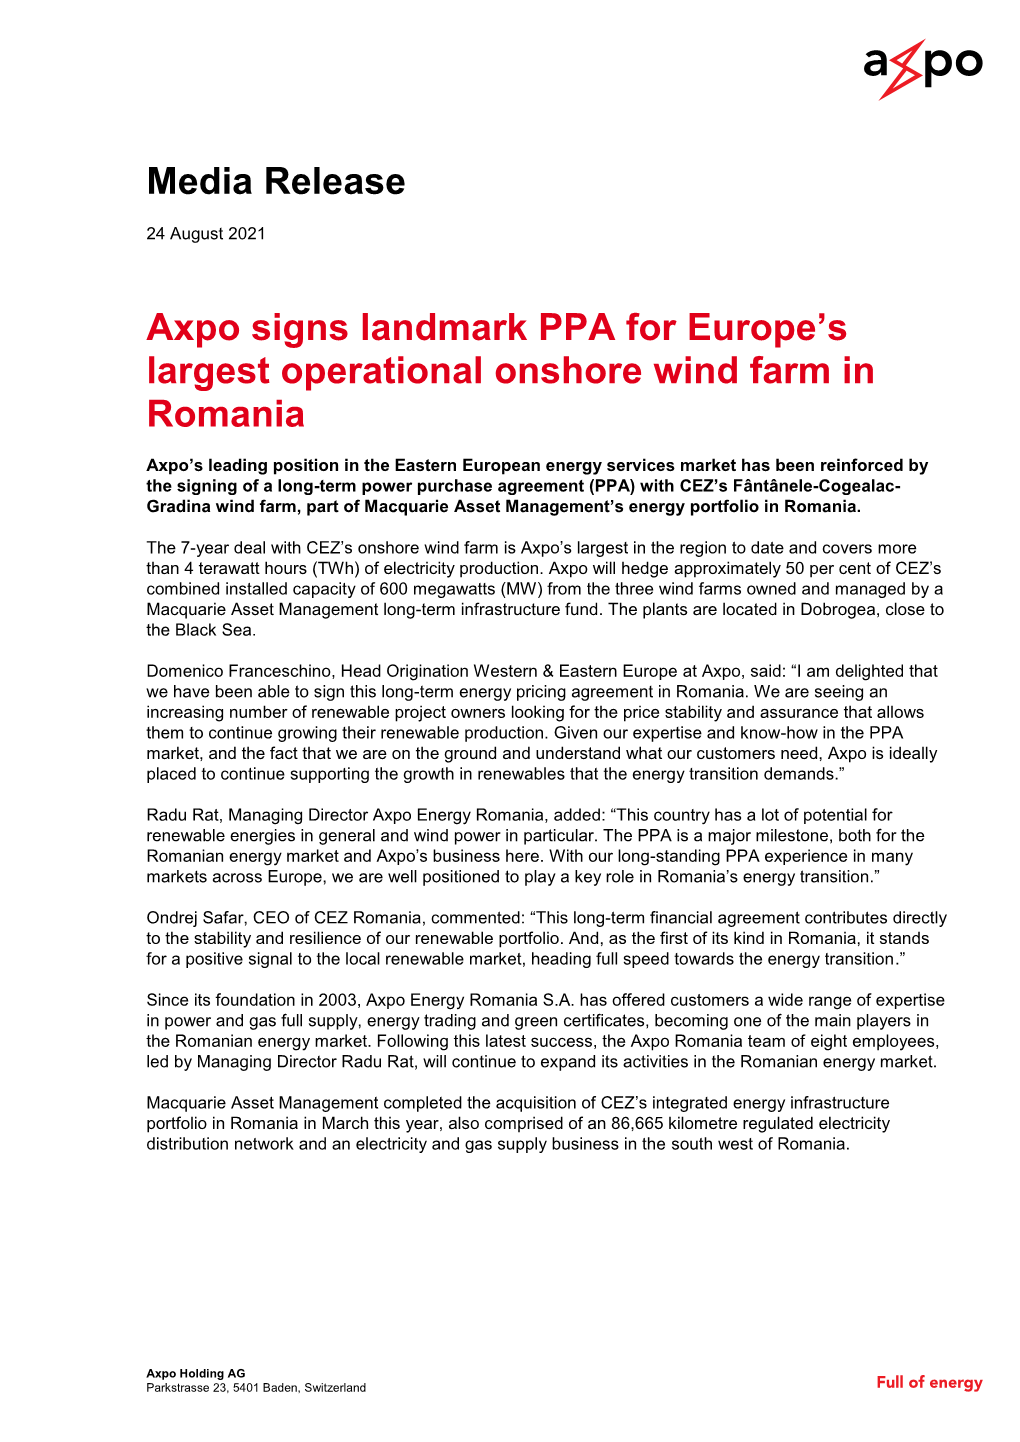 Media Release Axpo Signs Landmark PPA for Europe's Largest